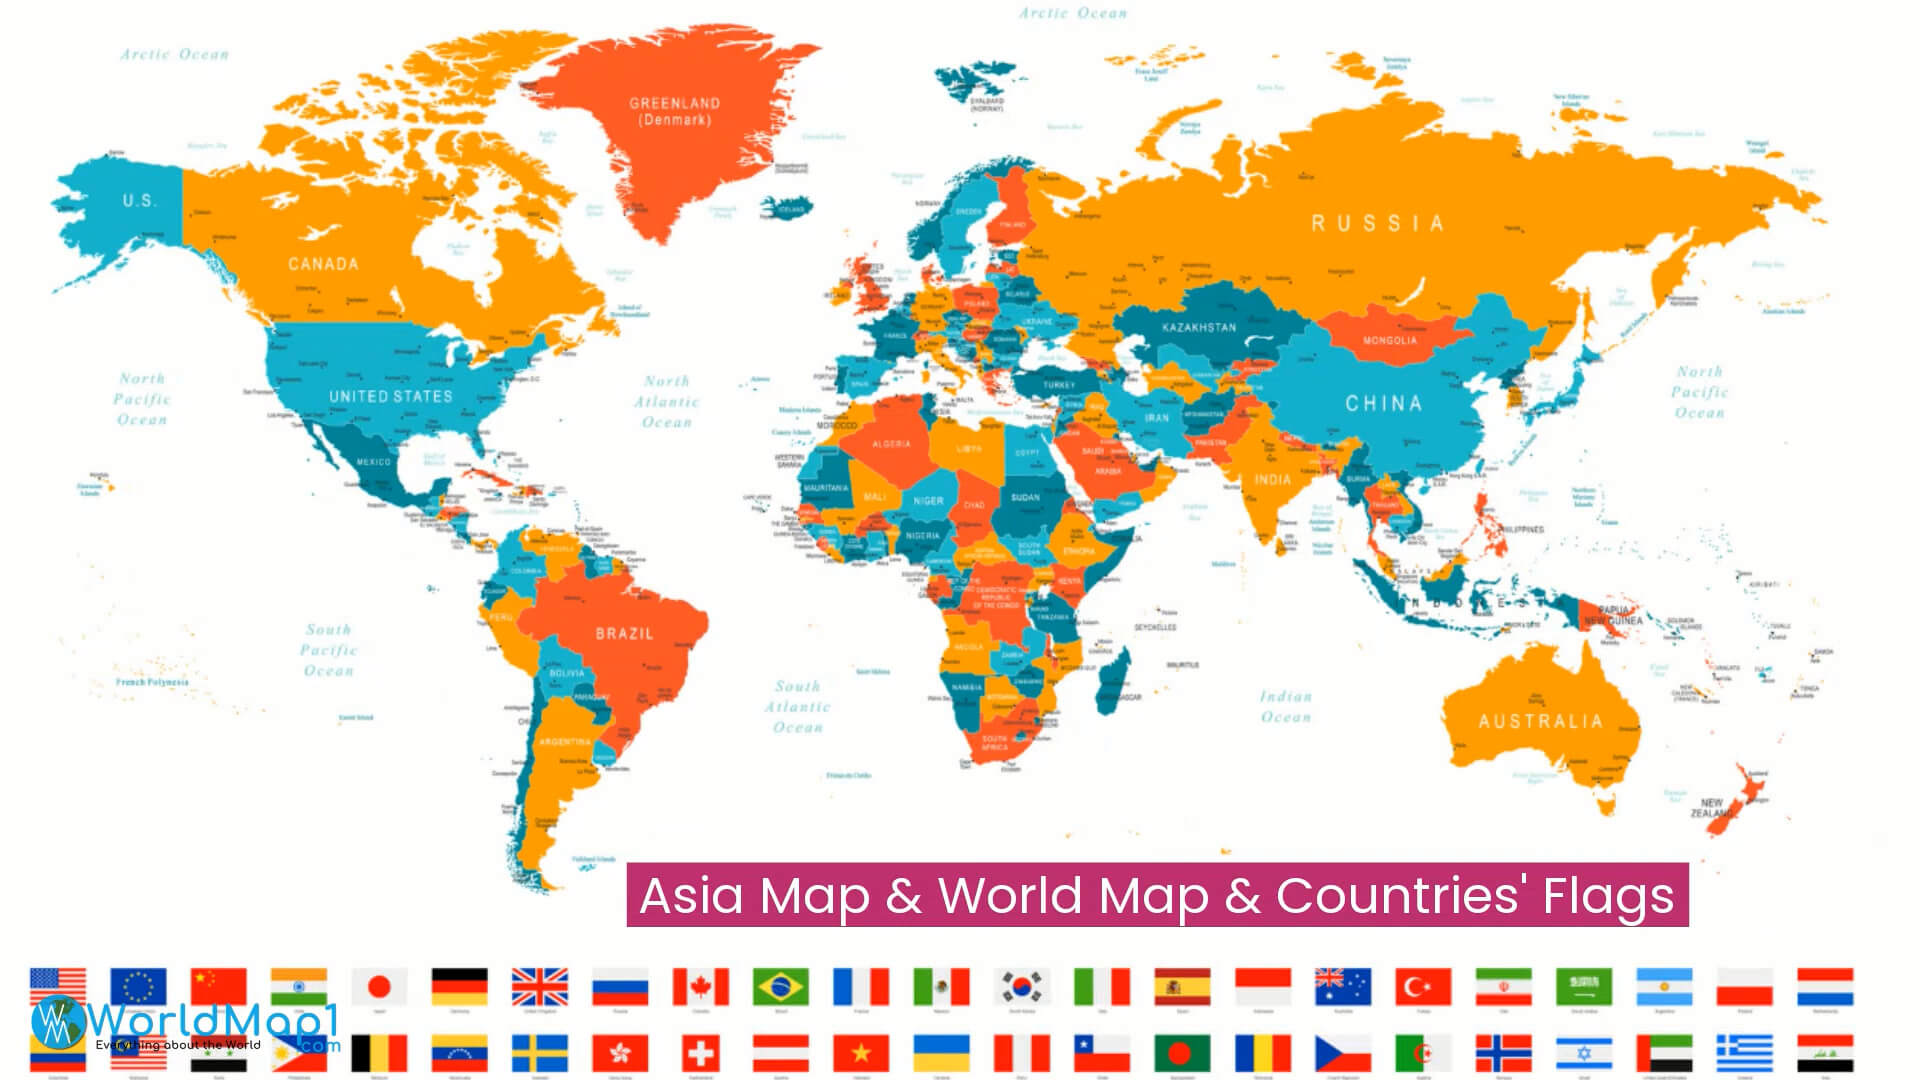 Asia Map with World Countries Flags